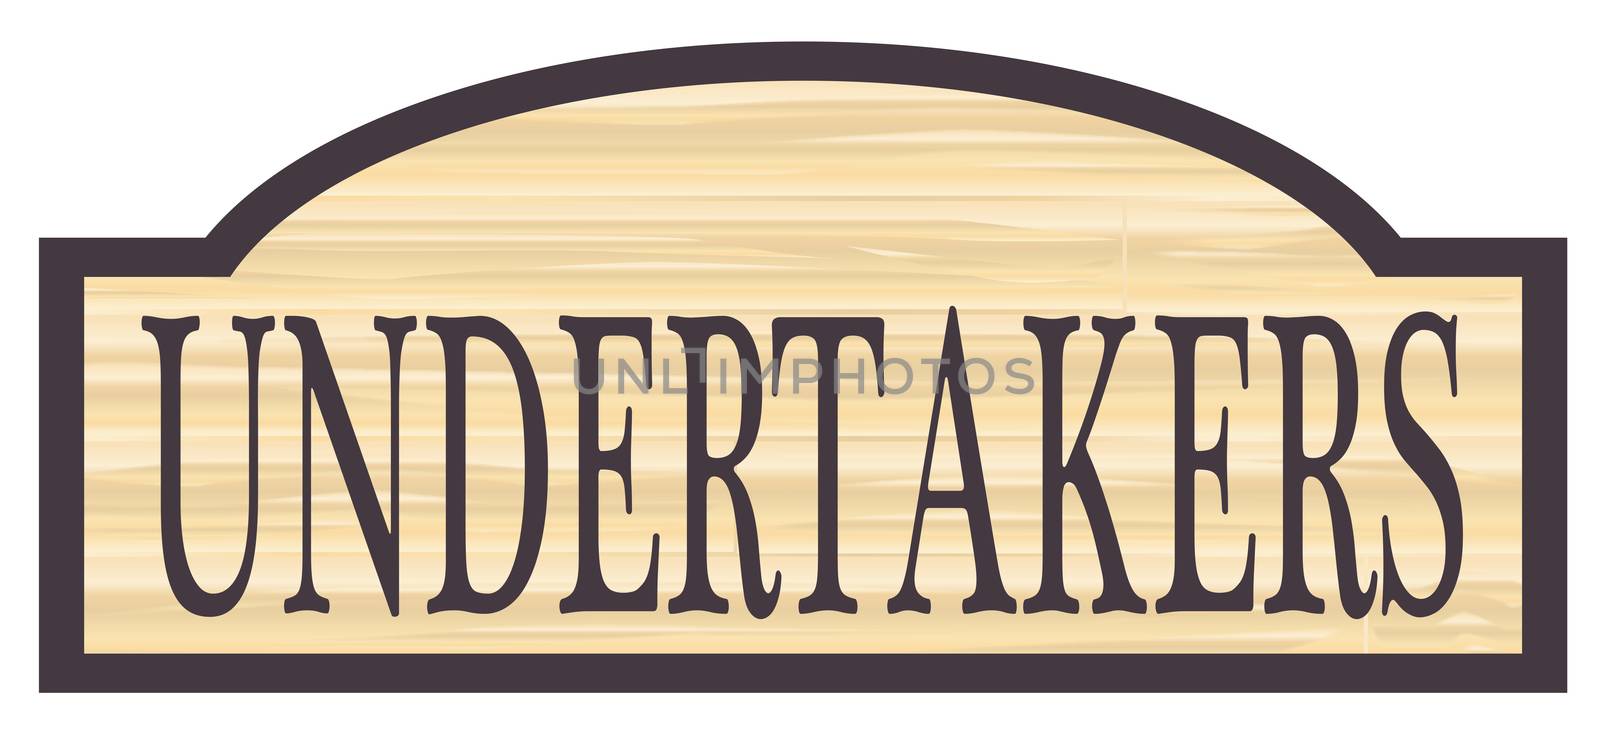 Undertakers store stylish wooden store sign over a white background